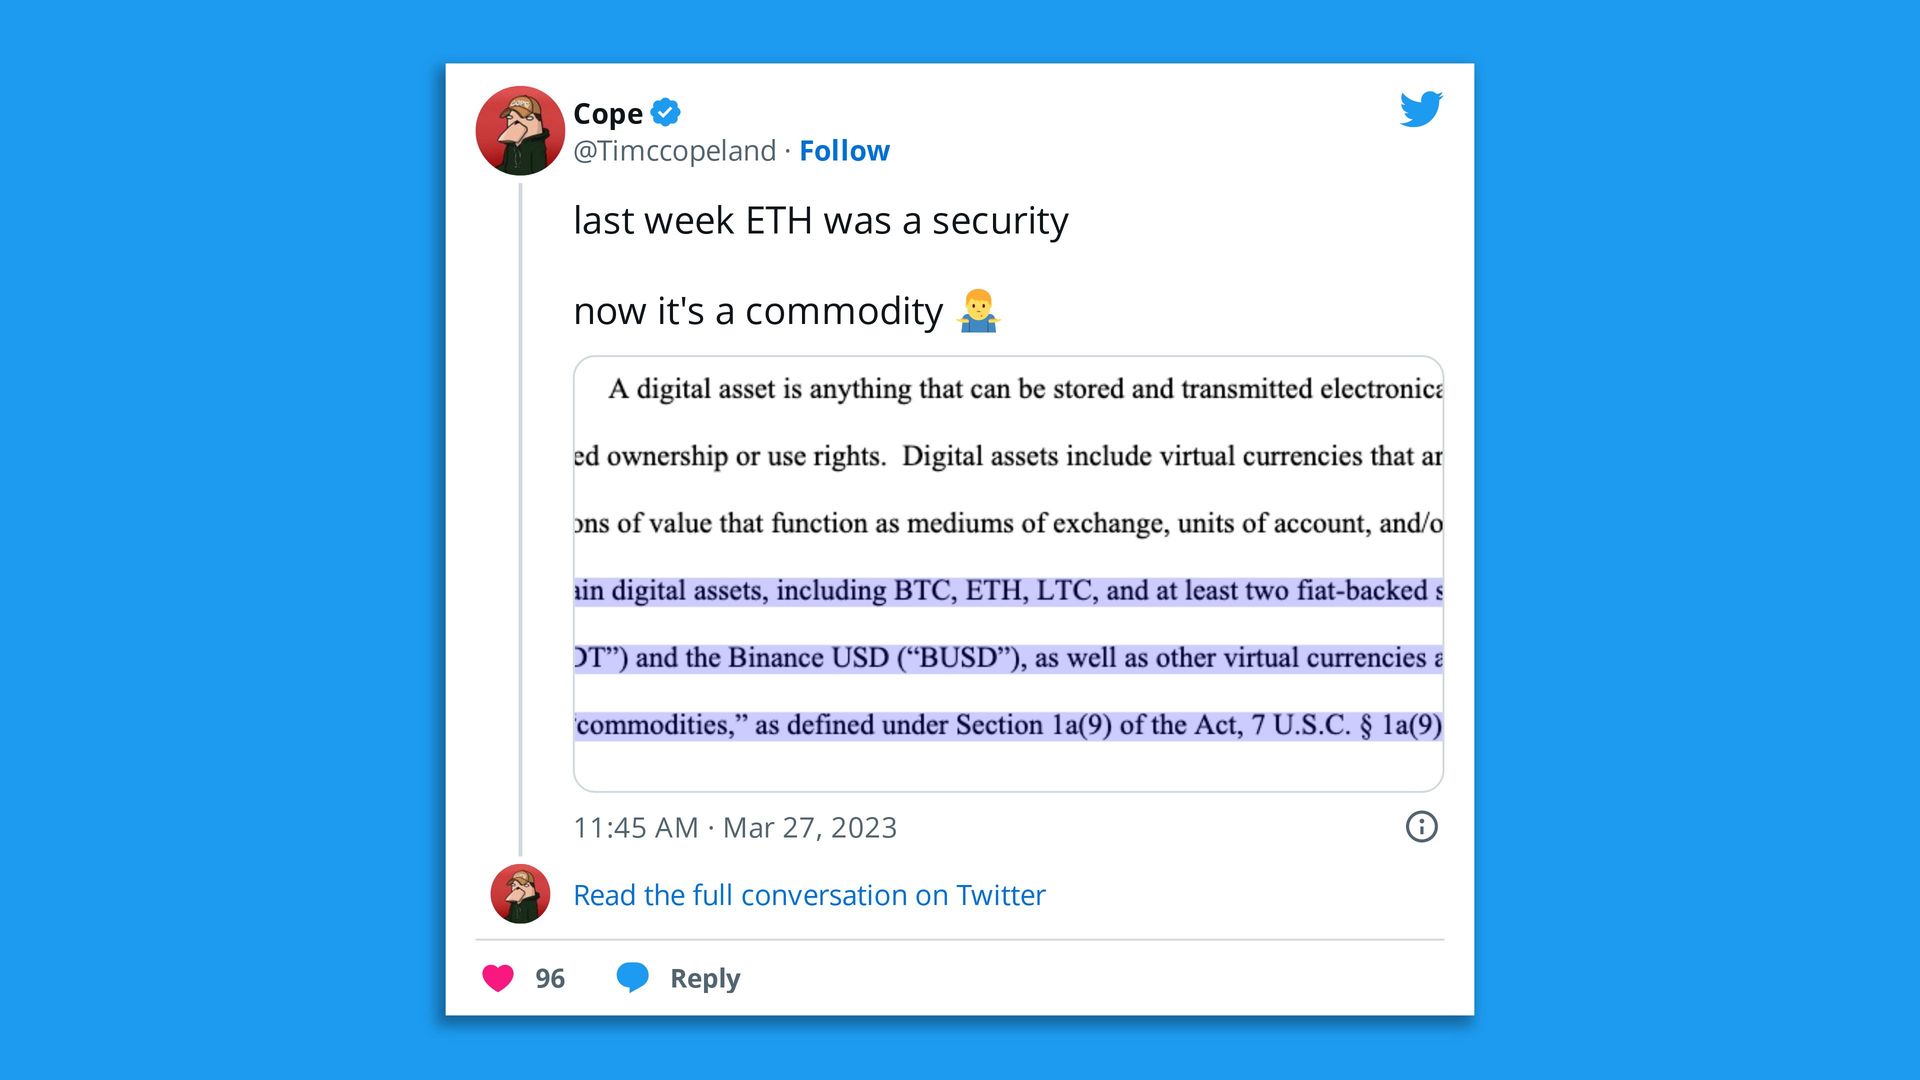 Twitter user says "last week ETH was a security" in a nod to overlapping regulatory jurisdictions in crypto